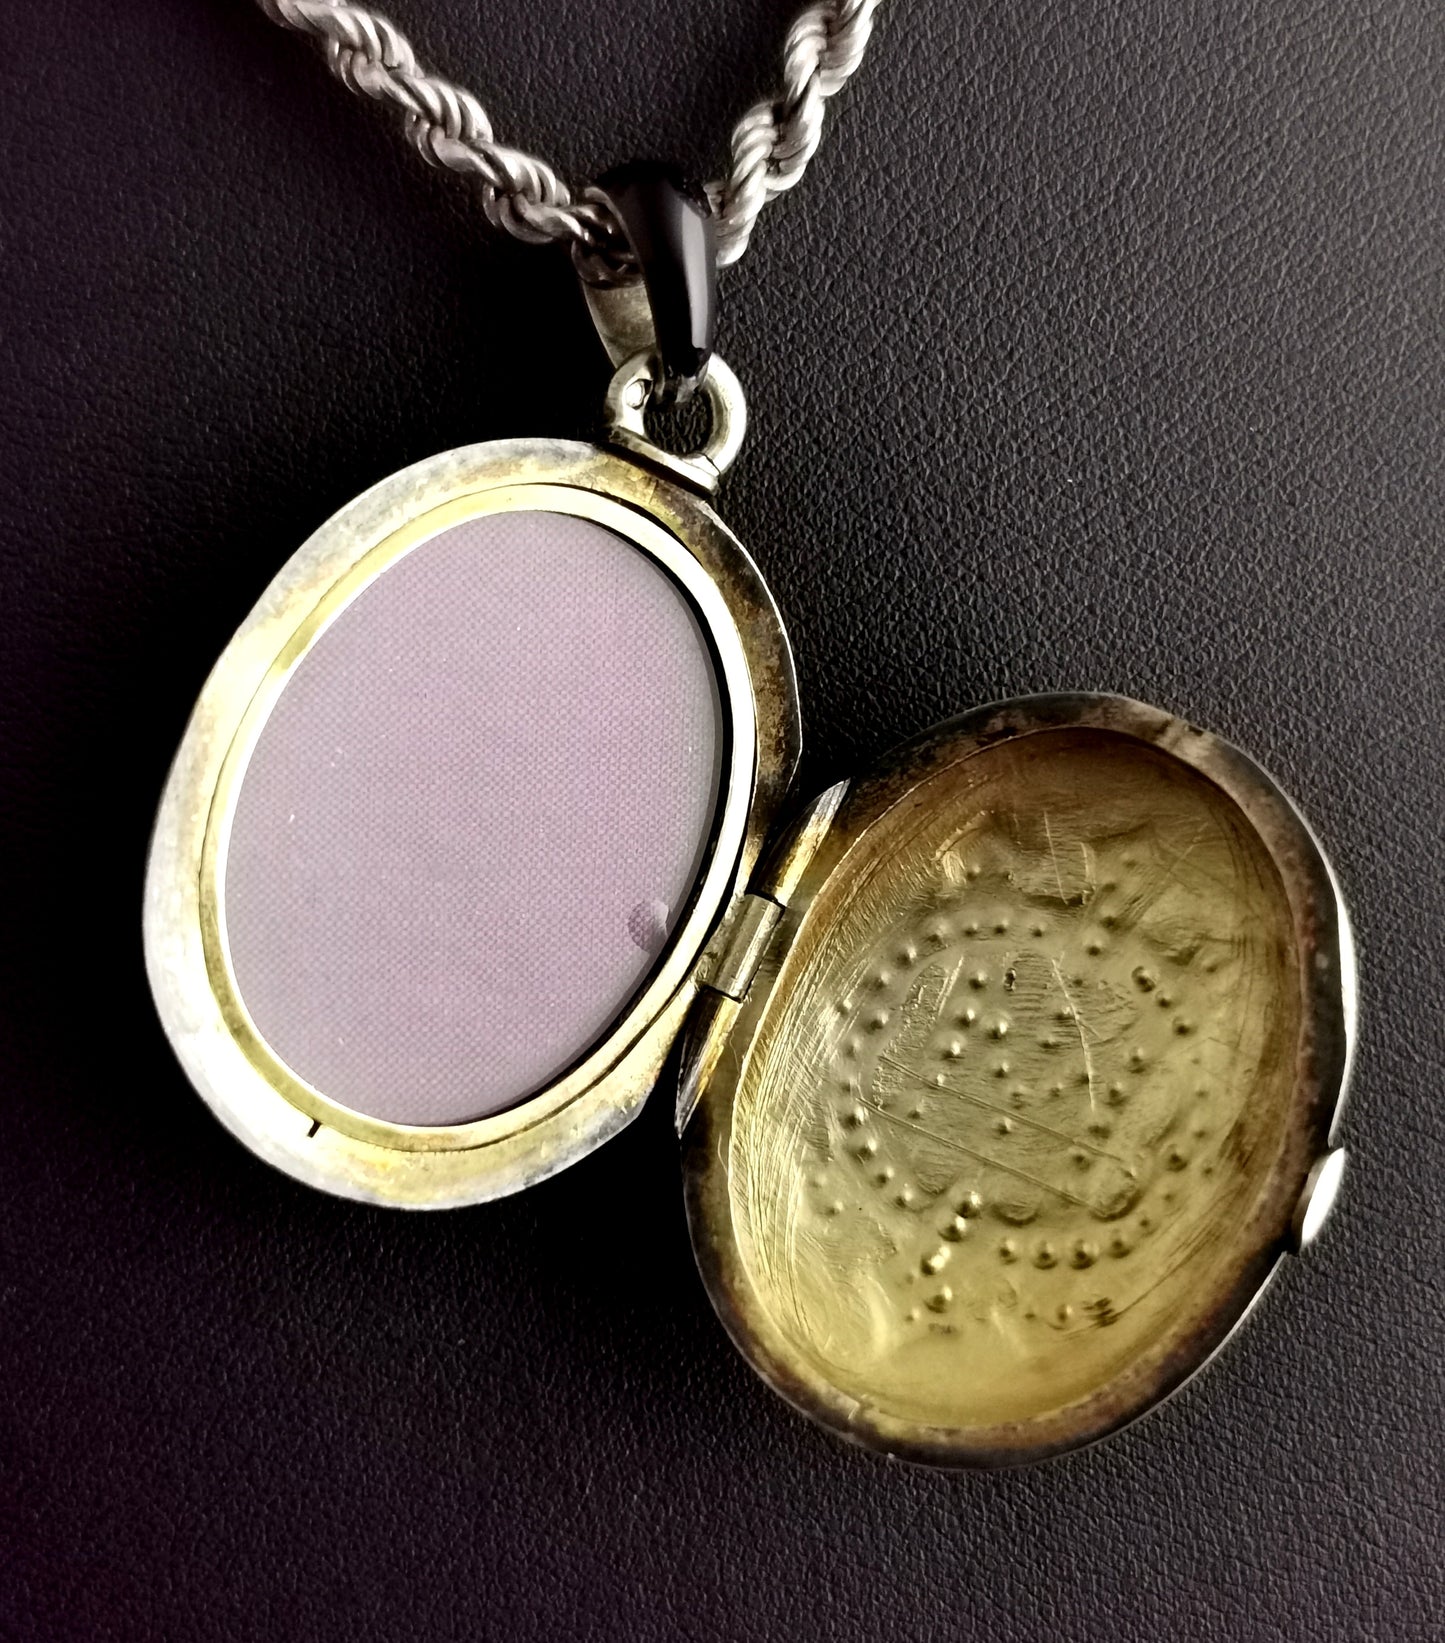 Victorian mourning locket, Black enamel and seed pearl, IMO